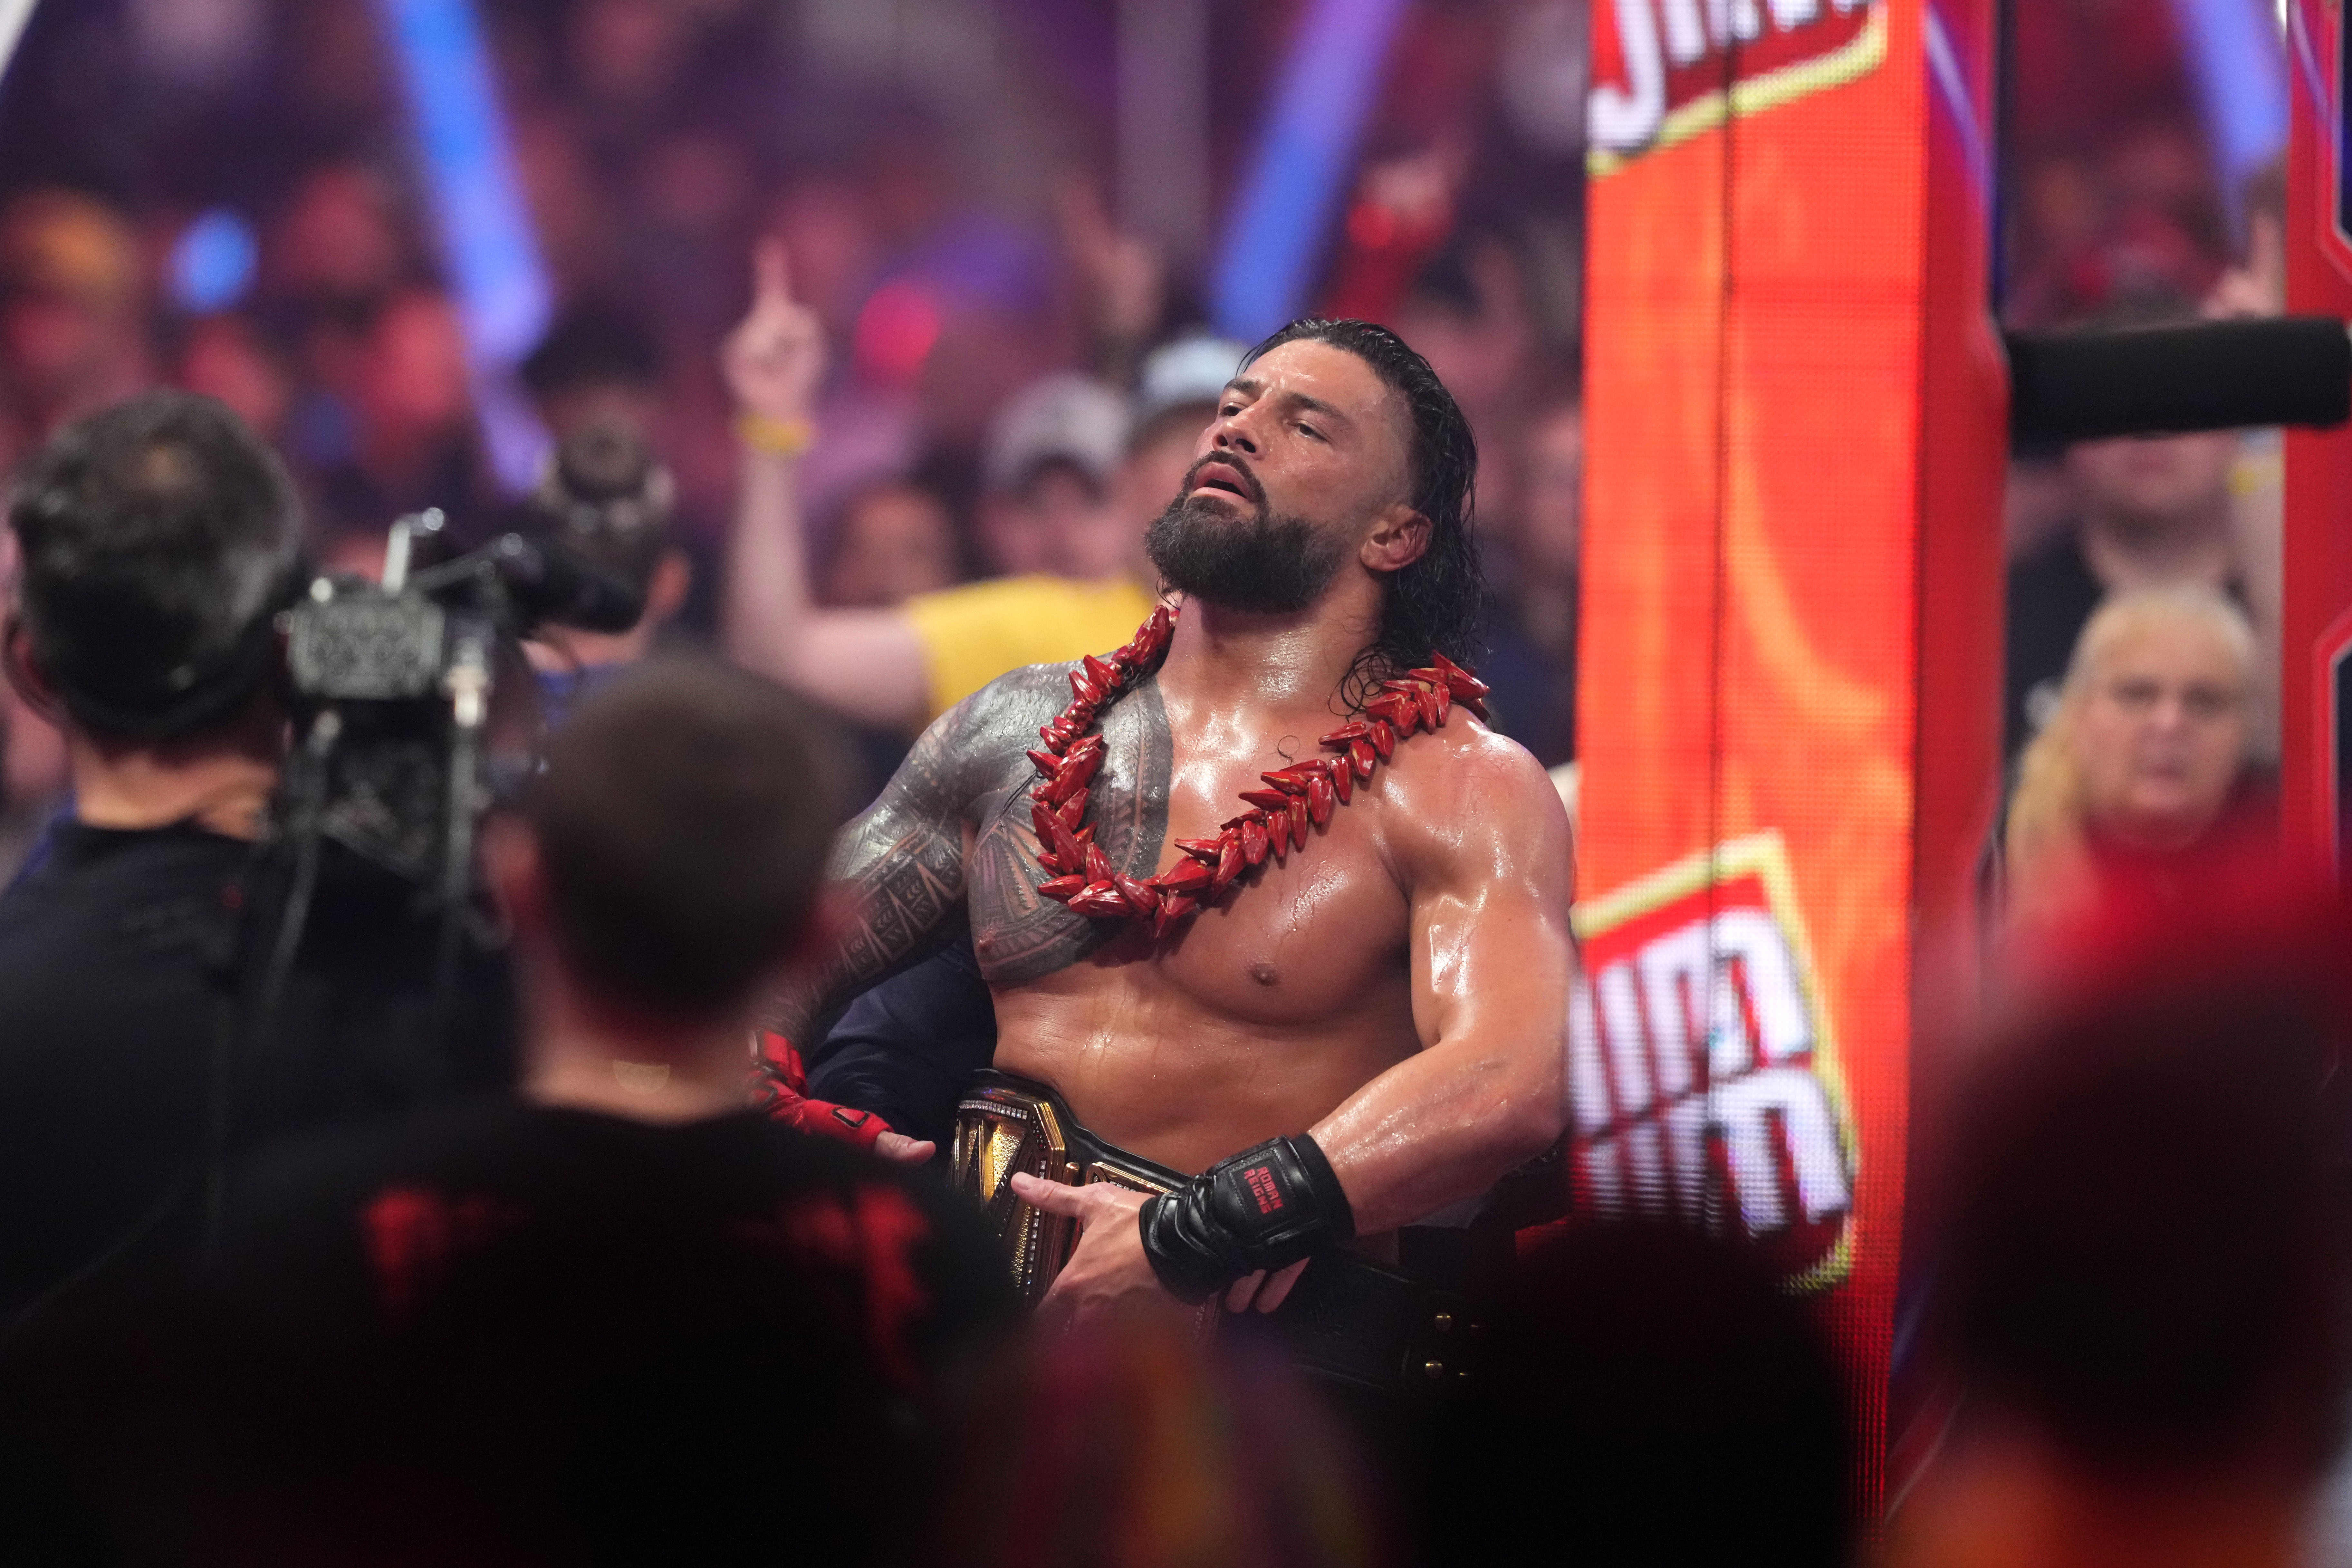 The 'Tribal Chief' is back: Roman Reigns returns to WWE at SummerSlam, spears Solo Sikoa